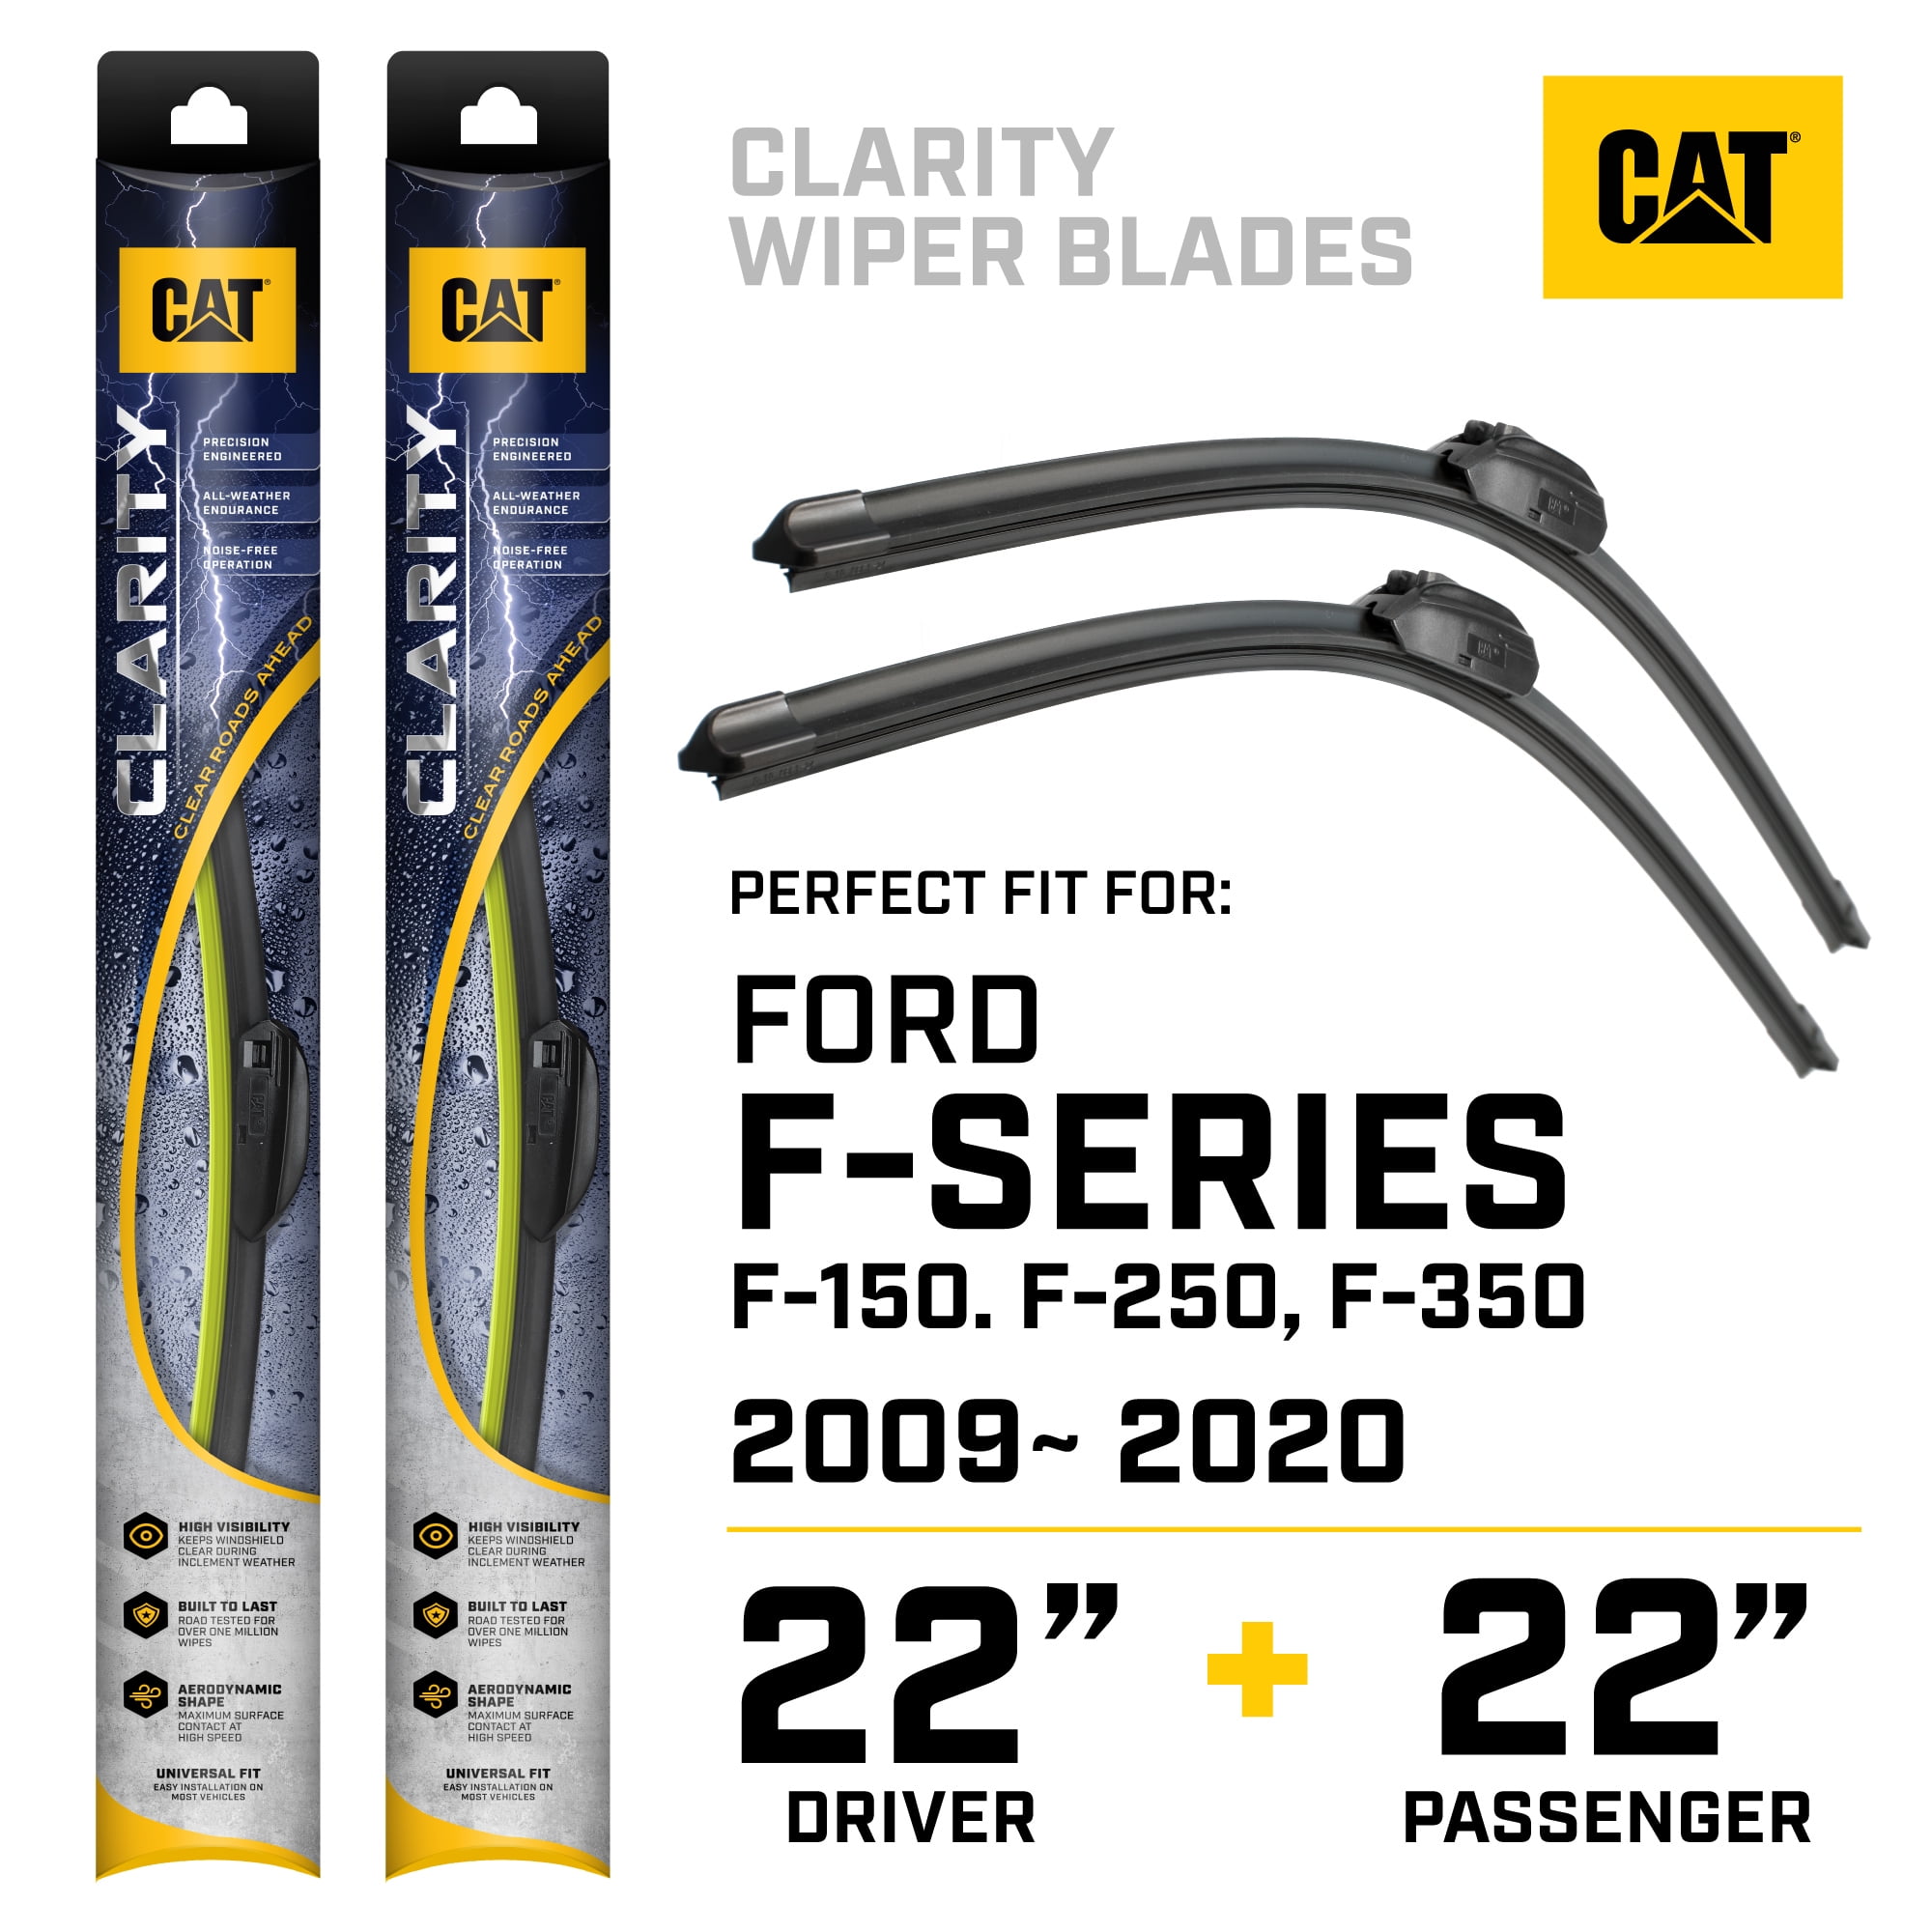 Caterpillar Clarity Premium Performance All Season Replacement Windshield Wiper Blades for Car Truck Van SUV 22 + 22 Inch - Perfect Fit for 2008-2020 Ford Expedition